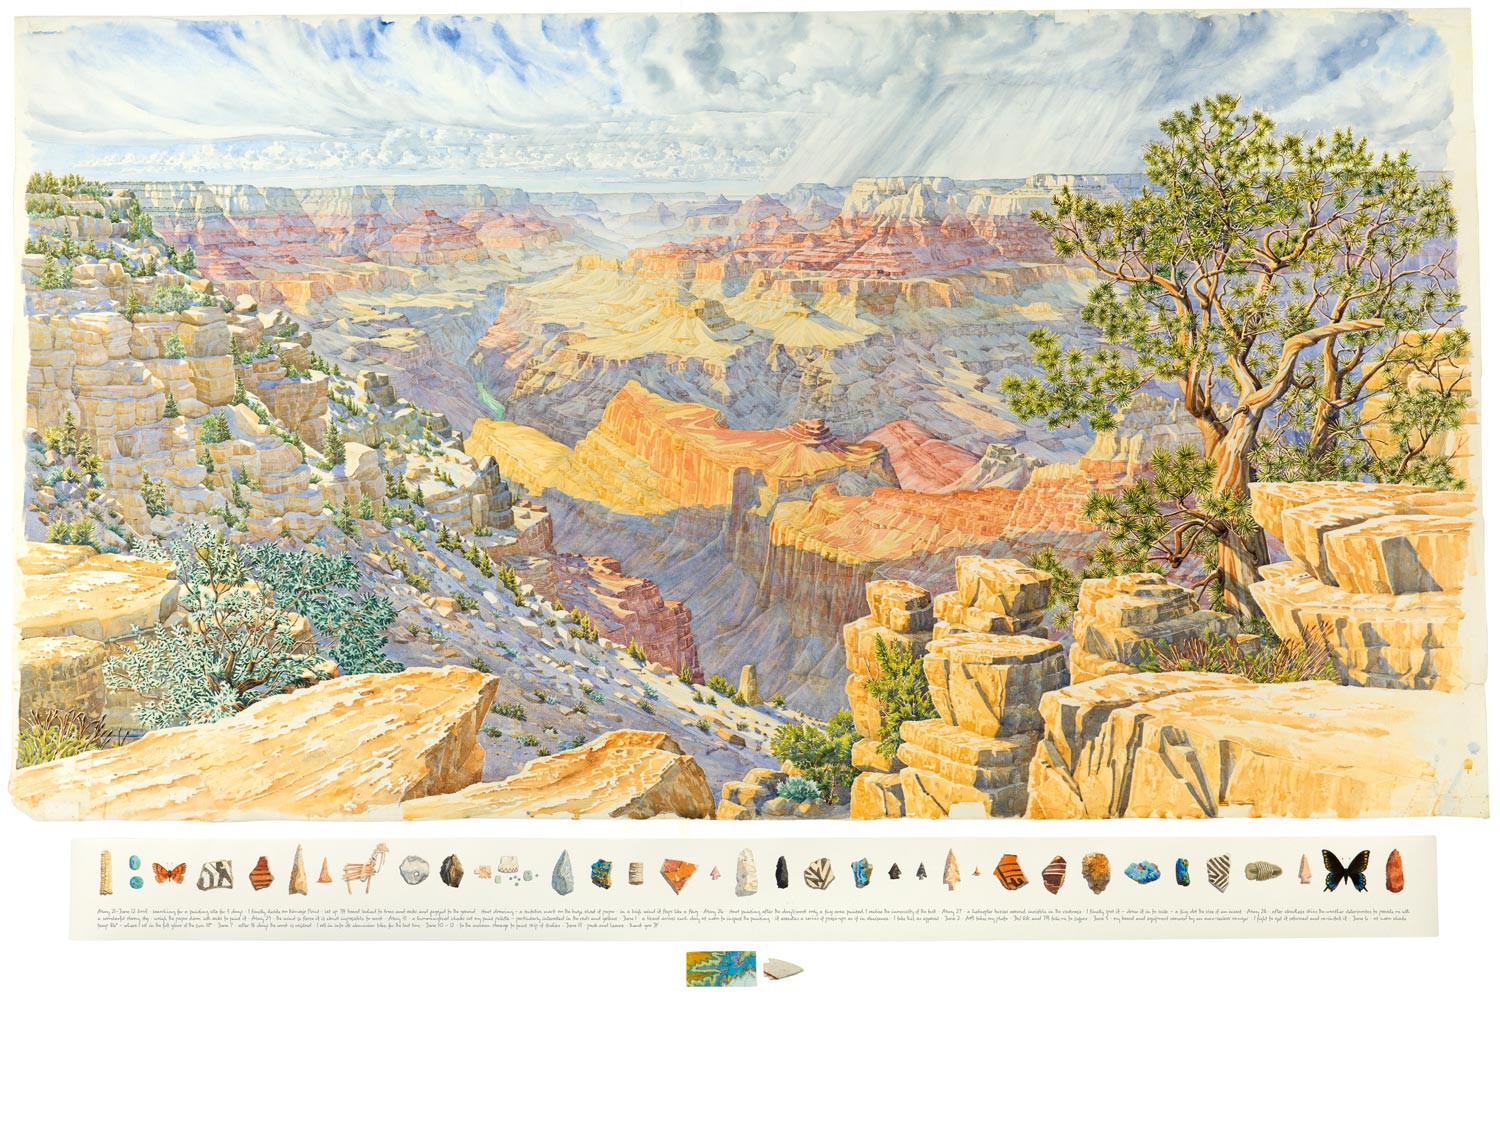   Tony Foster ,  Twenty-Three Days Painting the Canyon—From West of Navajo Point , 2013 